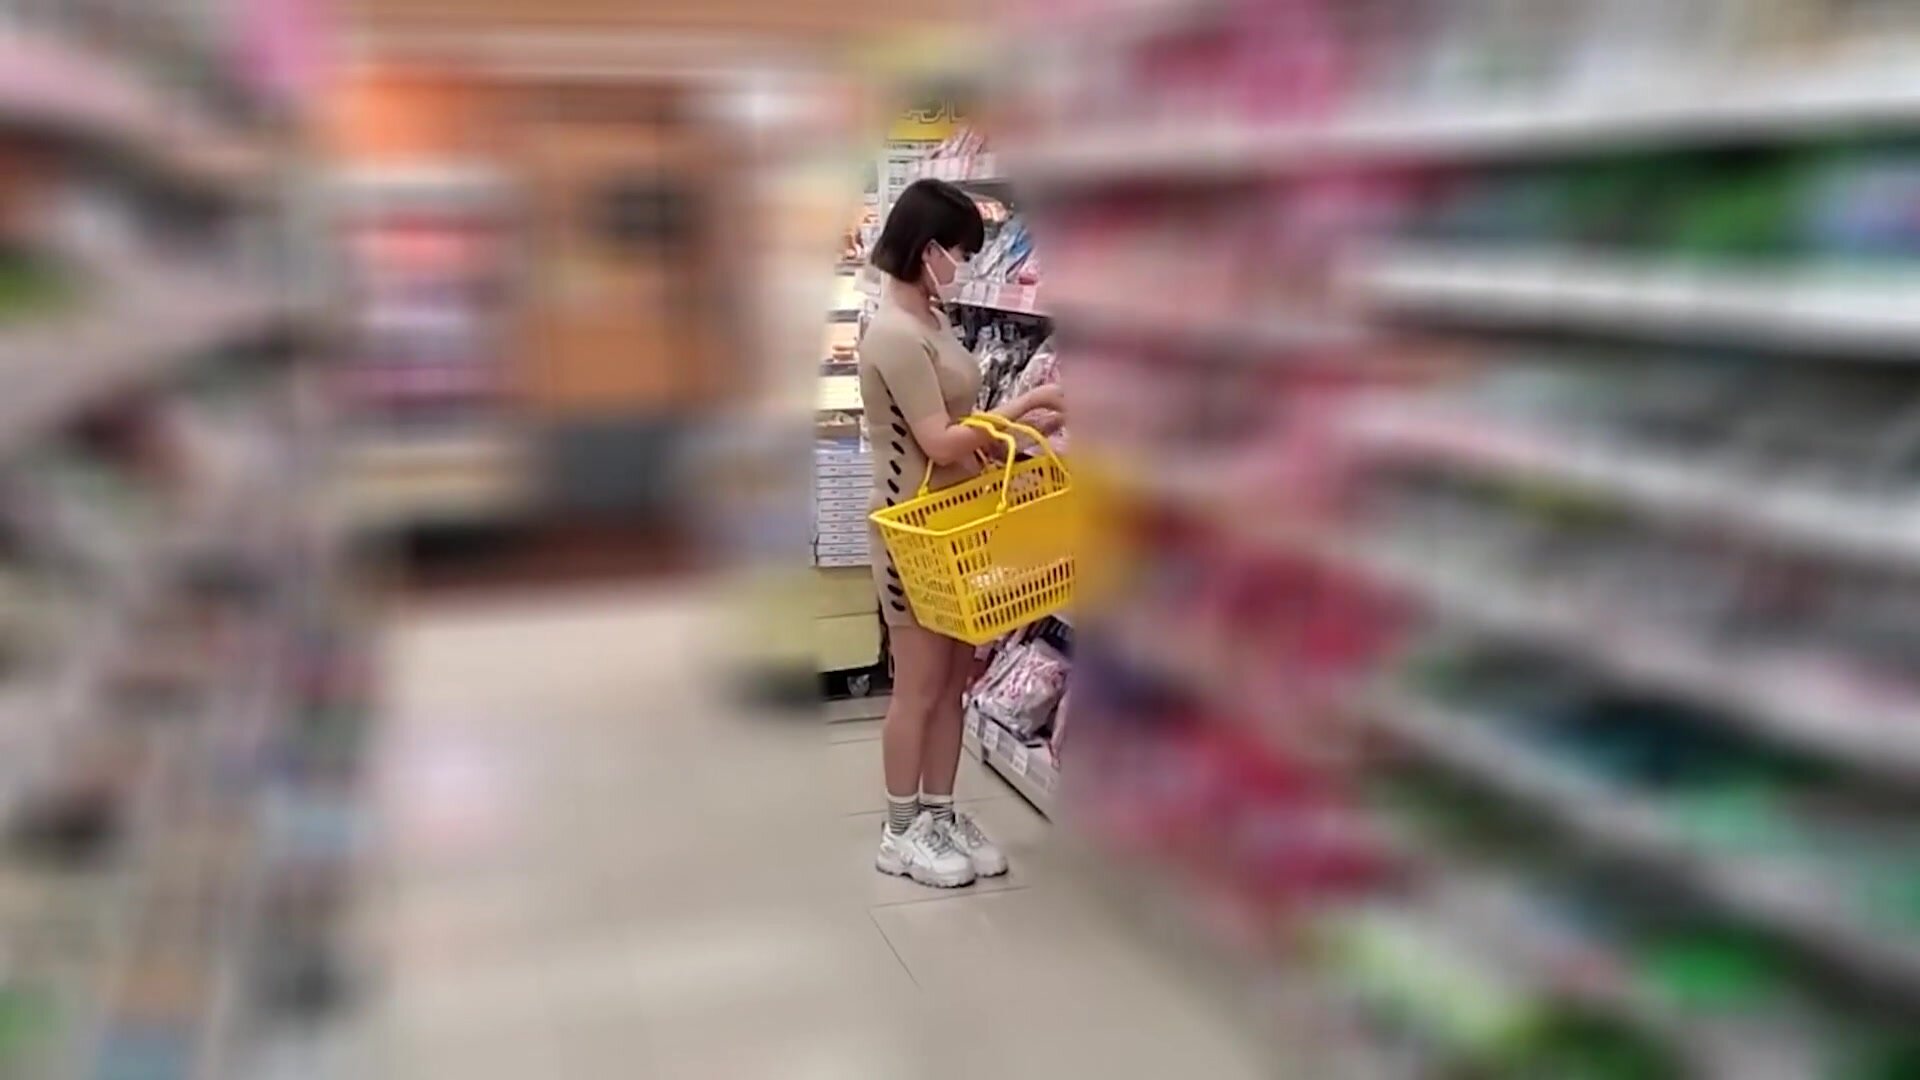 [Gonzo] A young wife shopping at a supermarket is found